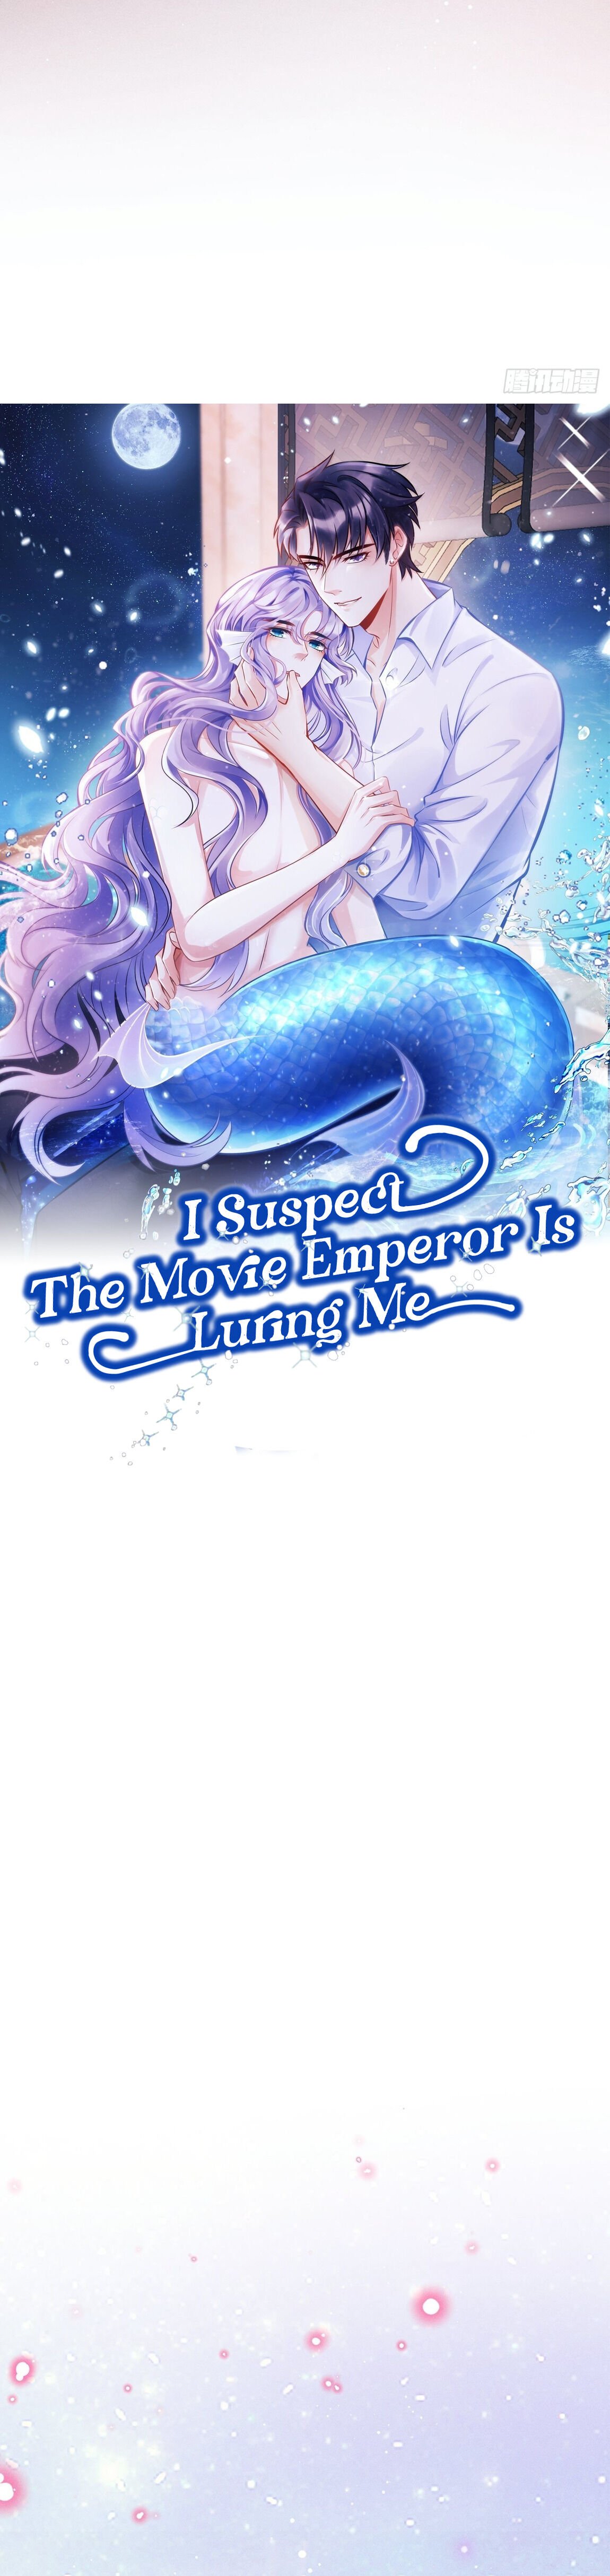 I suspect the movie emperor is luring me chapter 1